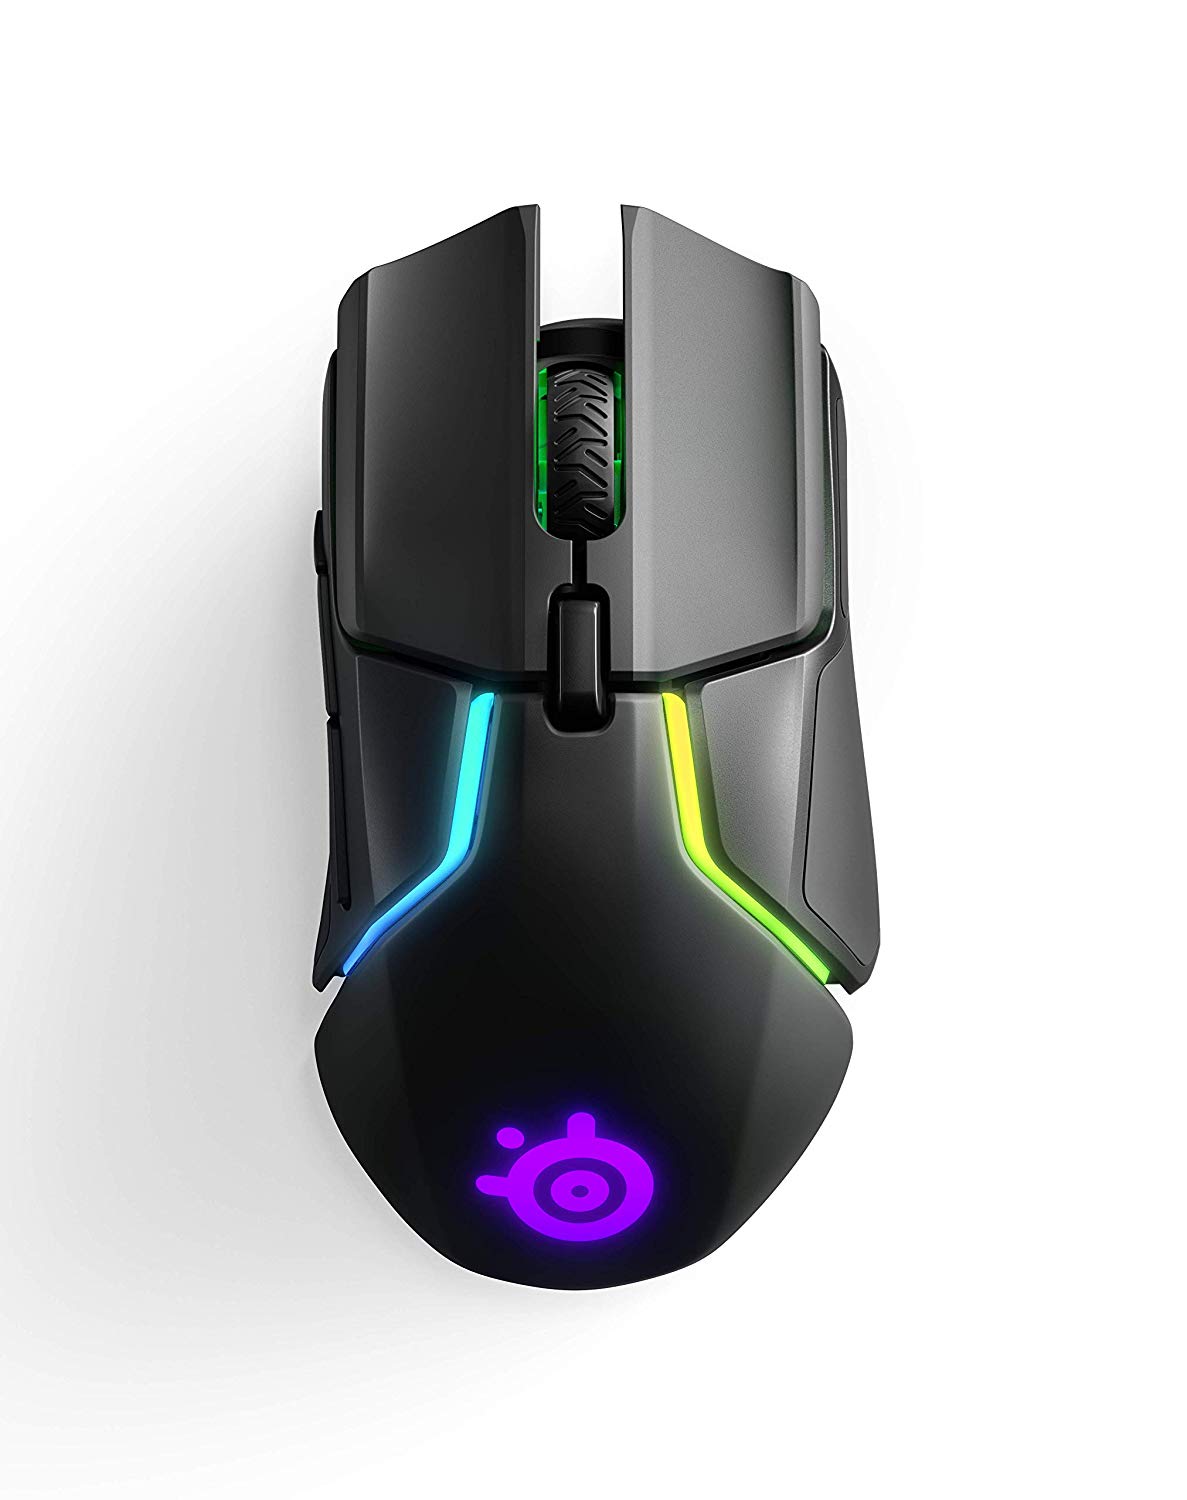 SteelSeries Rival 650 Quantum Wireless Gaming Mouse - Rapid Charging Battery - 12, 000 Cpi Truemove3+ Dual Optical Sensor - Low 0.5 Lift-Off Distance - 256 Weight Configurations - 8 Zone RGB Lighting - image 1 of 8